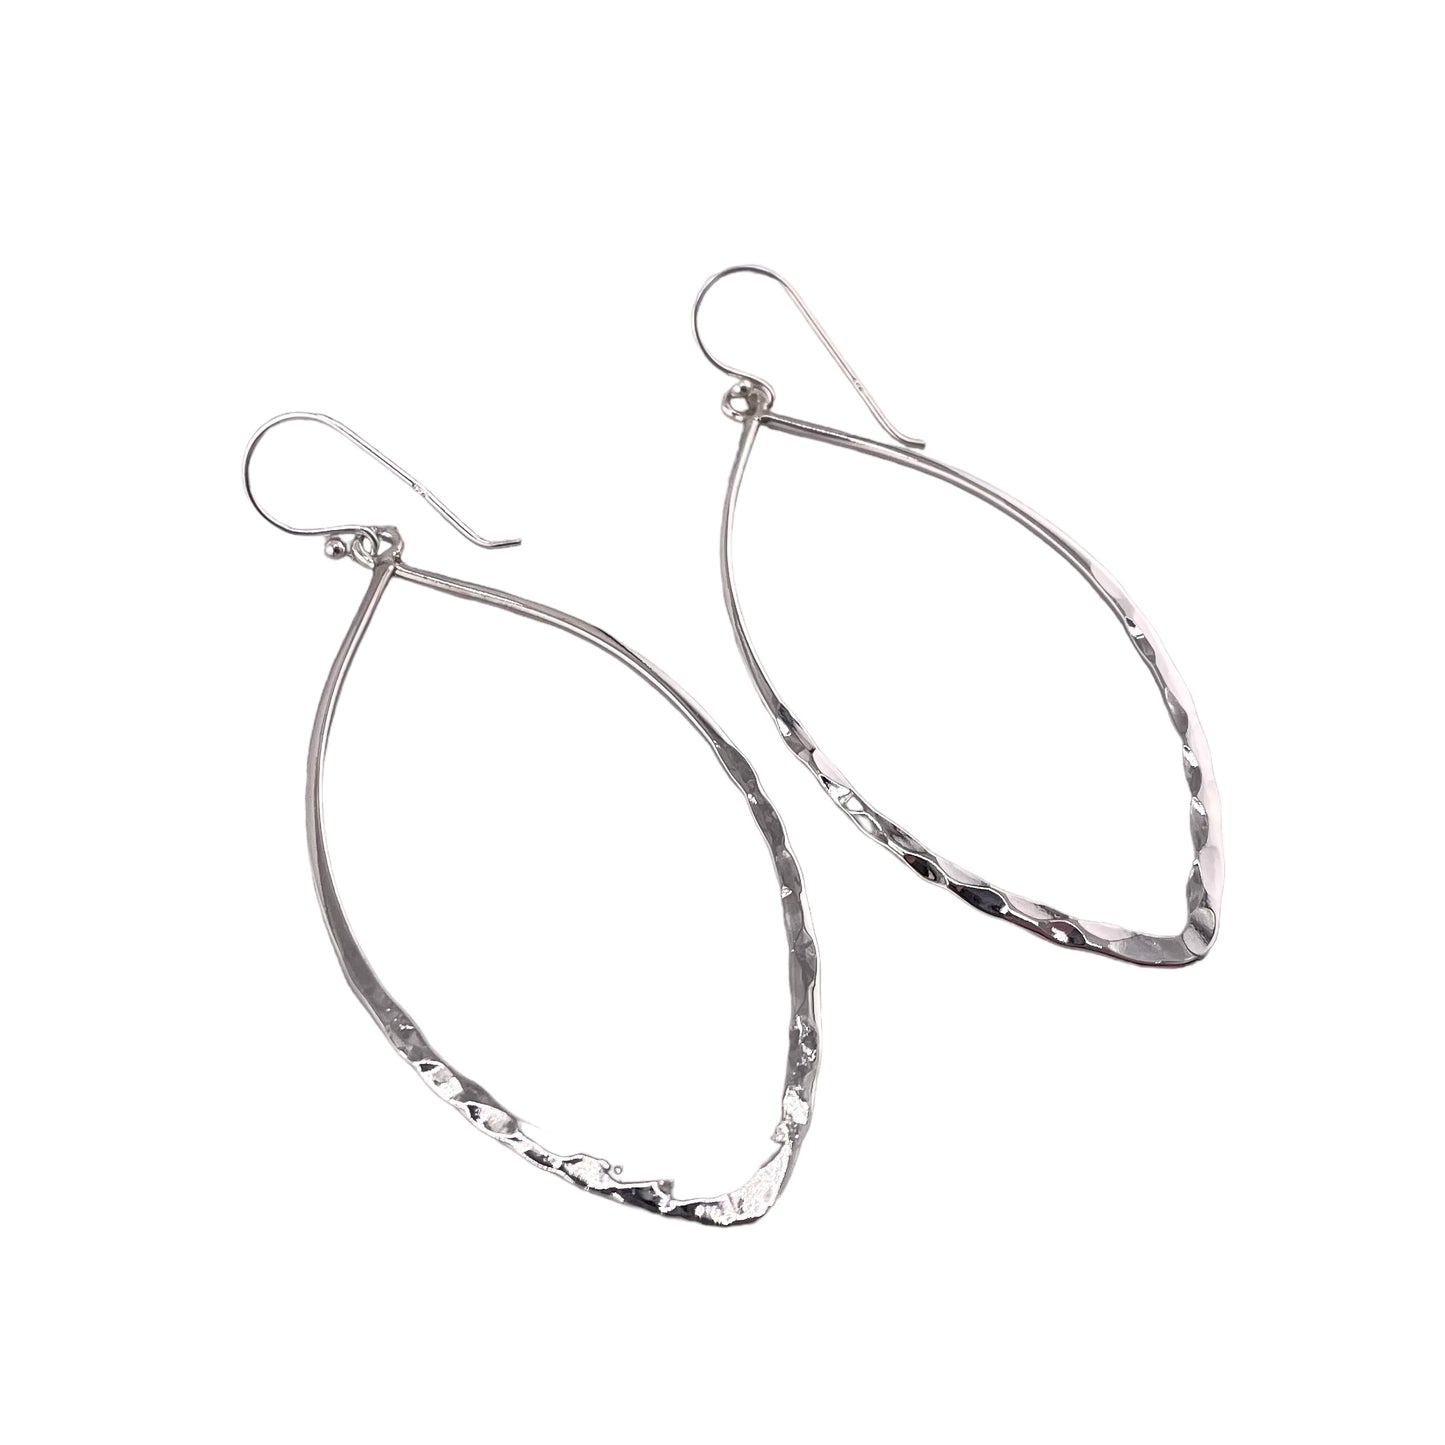 Hammered Fashion Dangle Earrings Sterling Silver